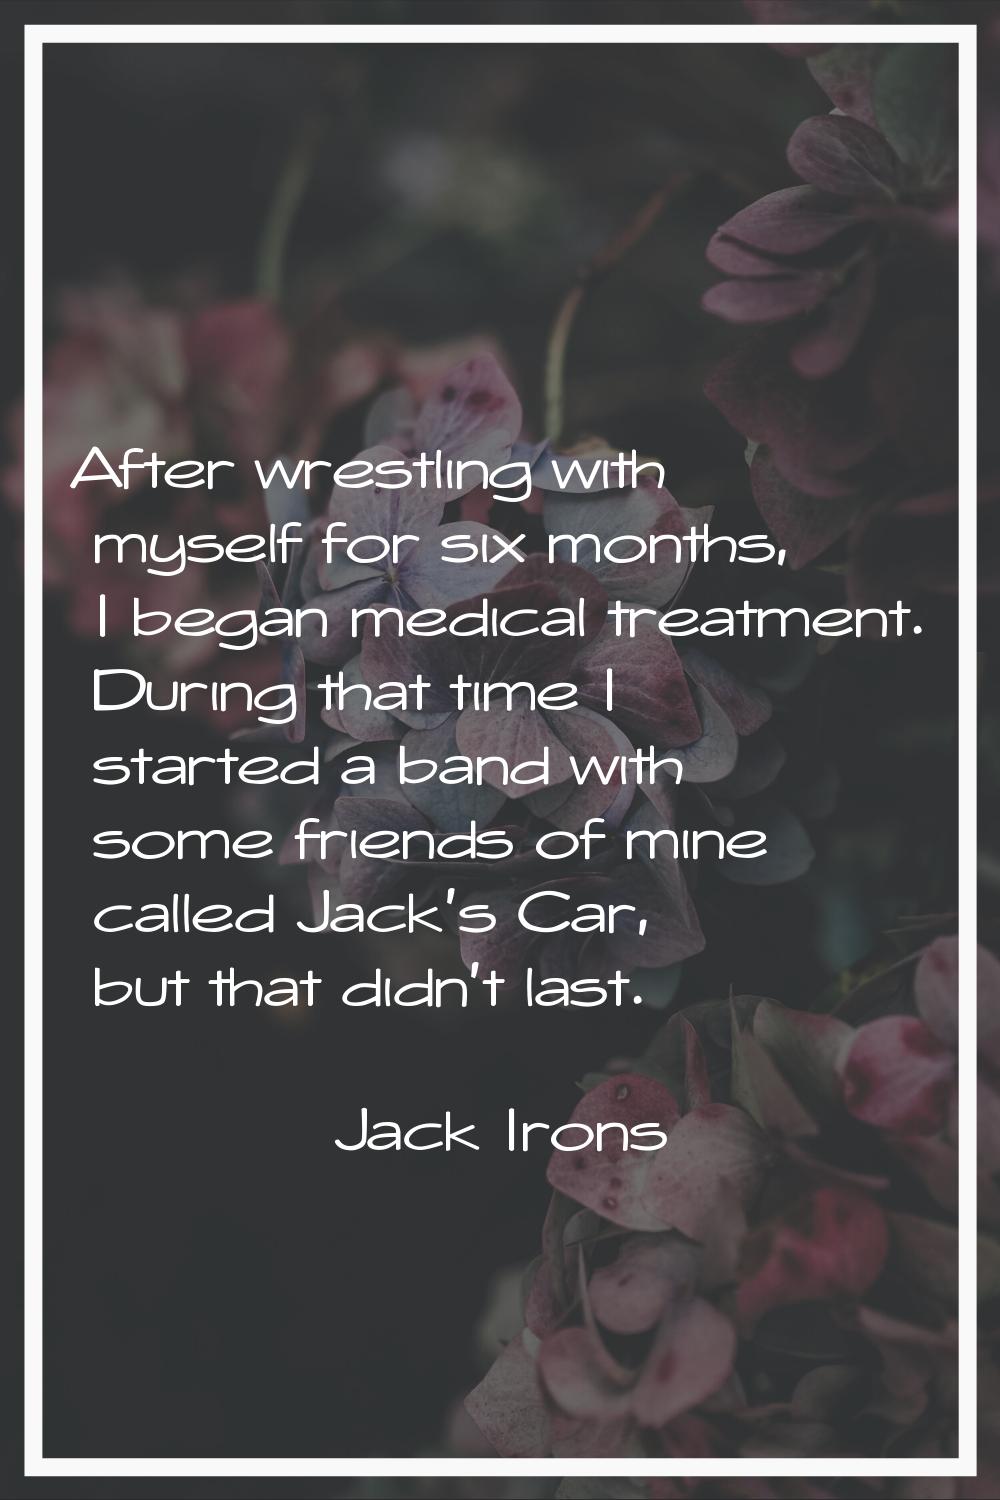 After wrestling with myself for six months, I began medical treatment. During that time I started a